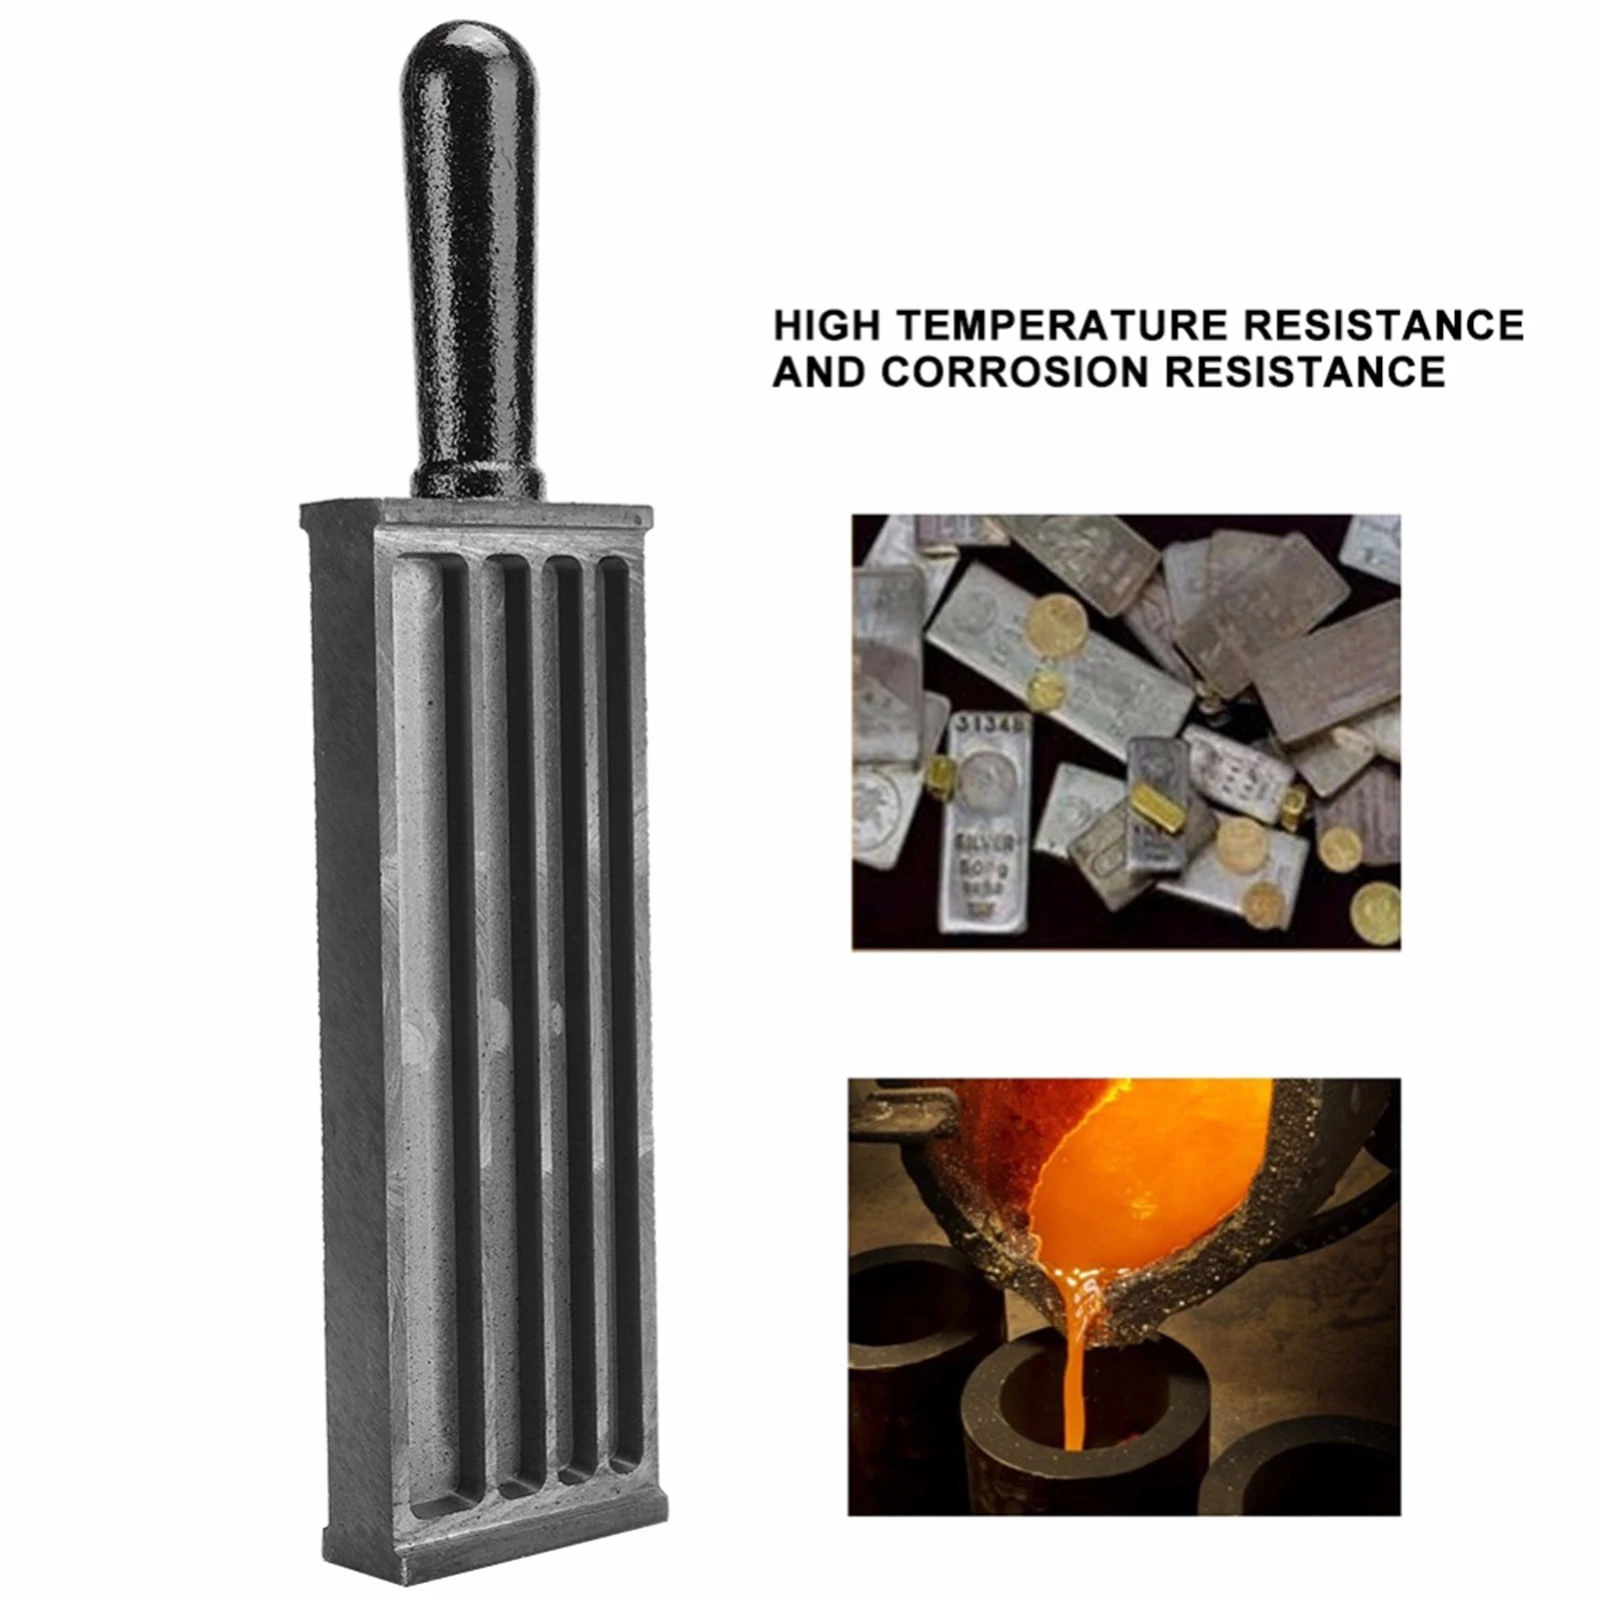 Portable Graphite Ingot Mold Mould Crucible for Melting Casting Refining Gold Silver Metal, Black , with Handle Design